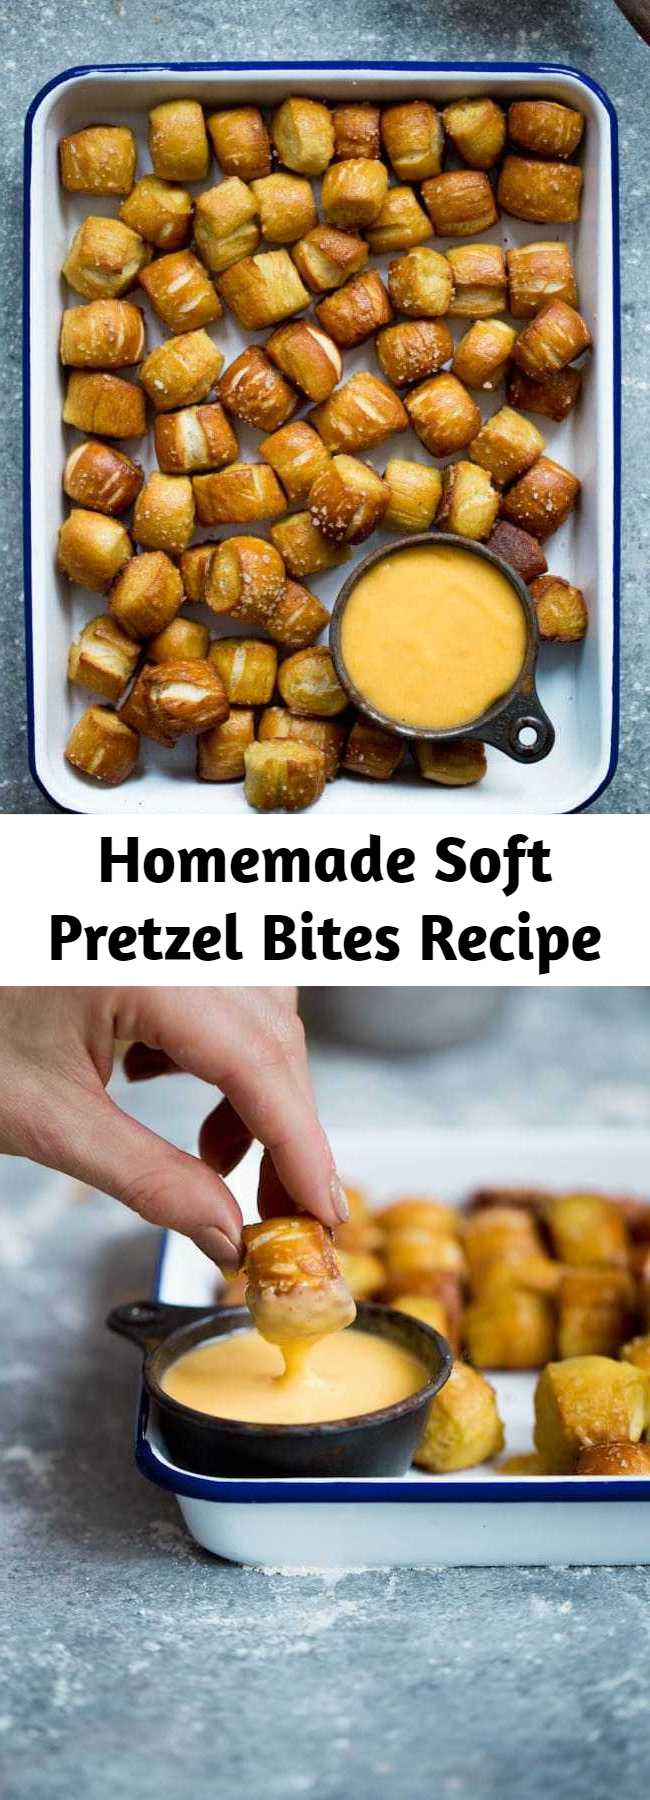 Homemade Soft Pretzel Bites Recipe - Homemade Soft Pretzel Bites-these little pretzel bites are fun to make at home and are great for parties and game day!